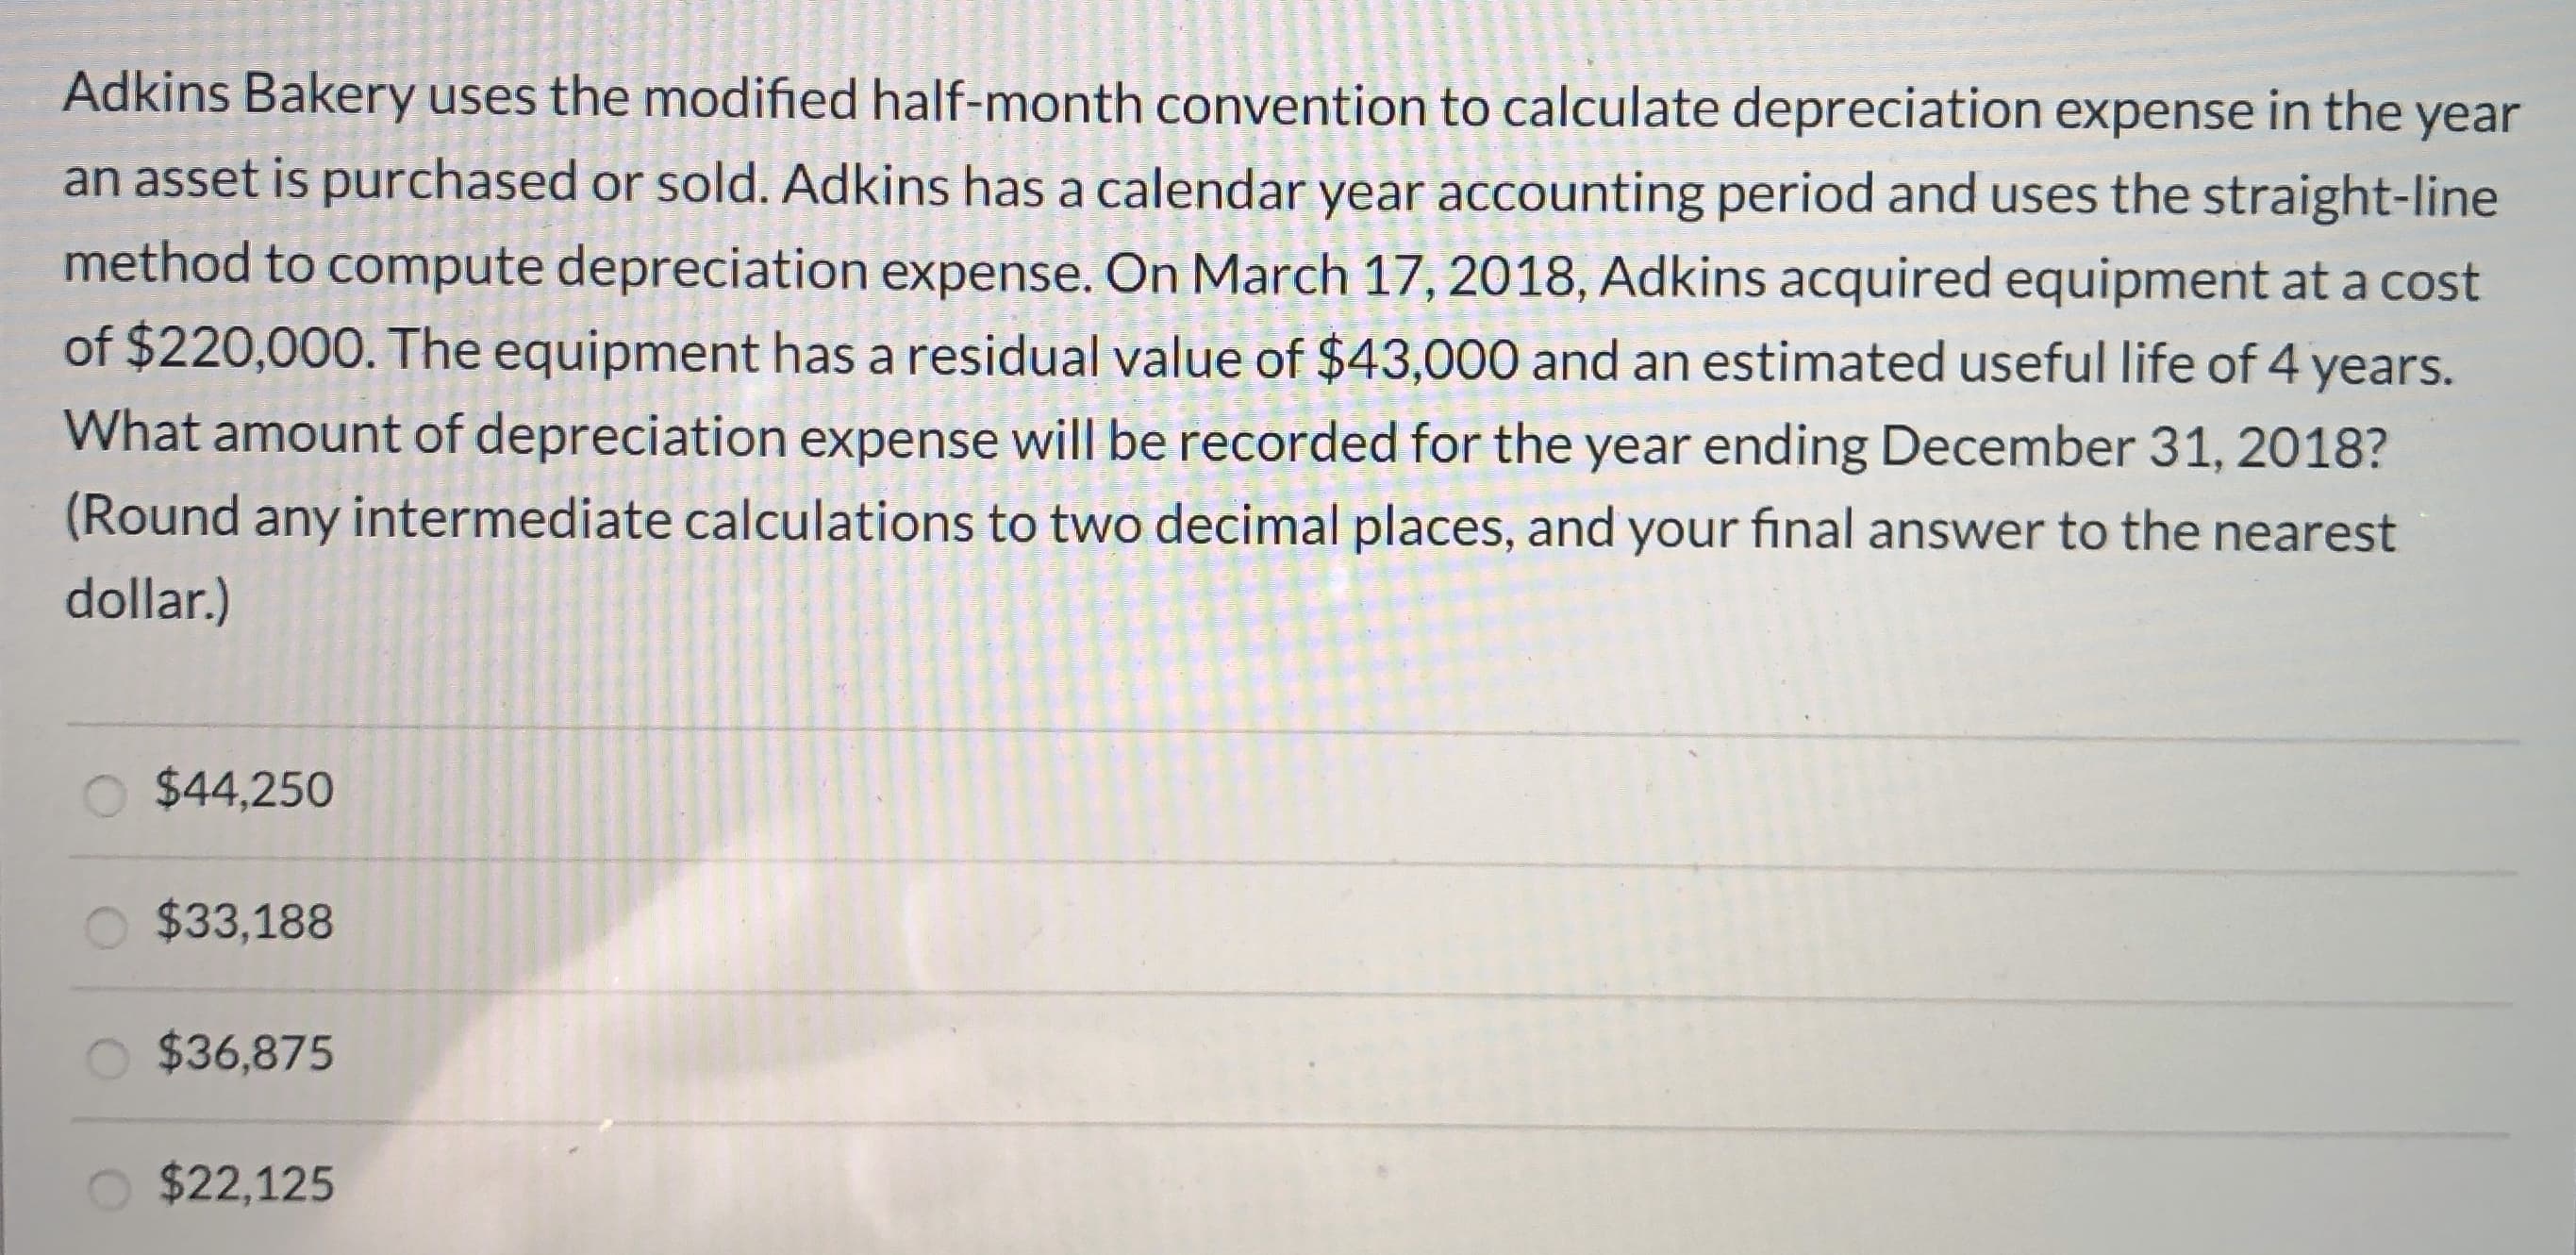 Adkins Bakery uses the modified half-month convention to calculate depreciation expense in the year
an asset is purchased or sold. Adkins has a calendar year accounting period and uses the straight-line
method to compute depreciation expense. On March 17, 2018, Adkins acquired equipment at a cost
of $220,000. The equipment has a residual value of $43,000 and an estimated useful life of 4 years.
What amount of depreciation expense will be recorded for the year ending December 31, 2018?
(Round any intermediate calculations to two decimal places, and your final answer to the nearest
dollar.)
$44,250
$33,188
$36,875
$22,125
